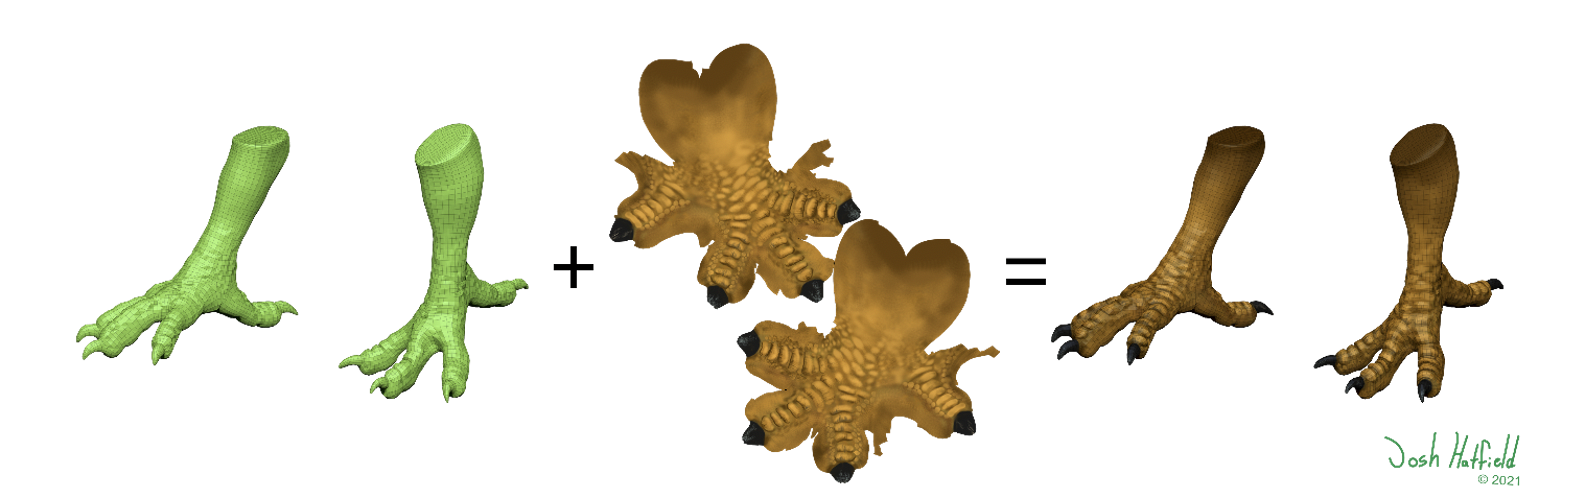 Fig 4: An example of the low-resolution model of the Dodo’s legs without the texture map (left), the texture map (middle), and the texture map applied to the legs (right).